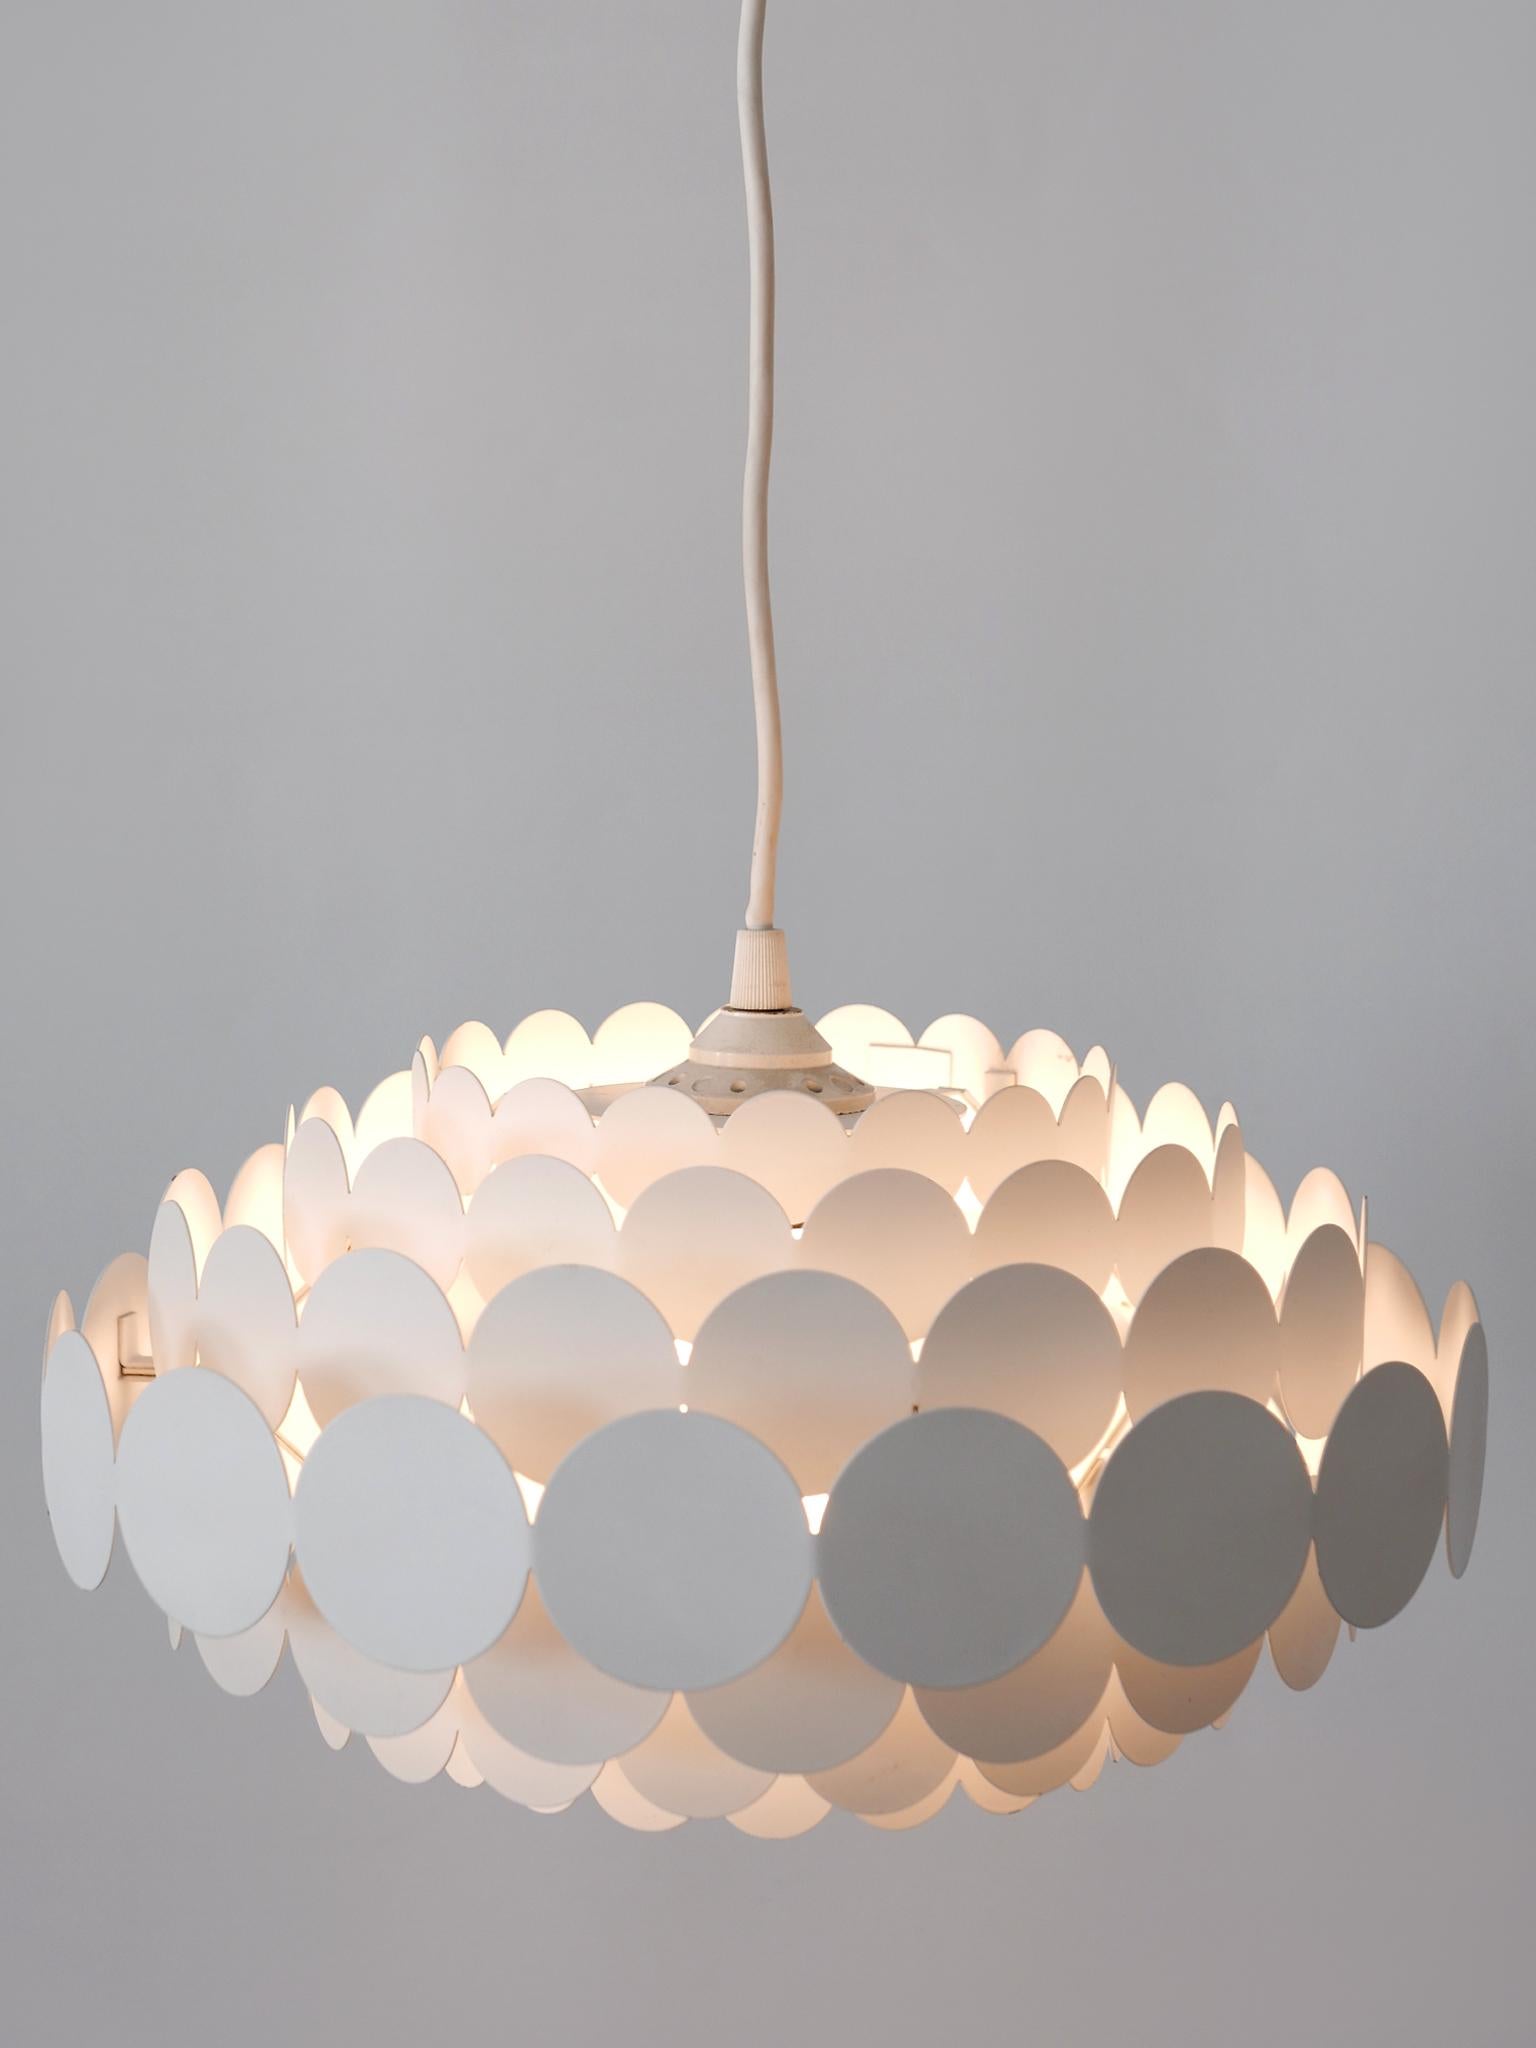 Lovely & highly decorative Mid-Century Modern pendant lamp or hanging light. Manufactured by Doria Leuchten, Germany, 1960s.

Executed in white enameled metal plates, the pendant lamp comes with 1 x E27 / E26 Edison screw fit bulb socket, is wired